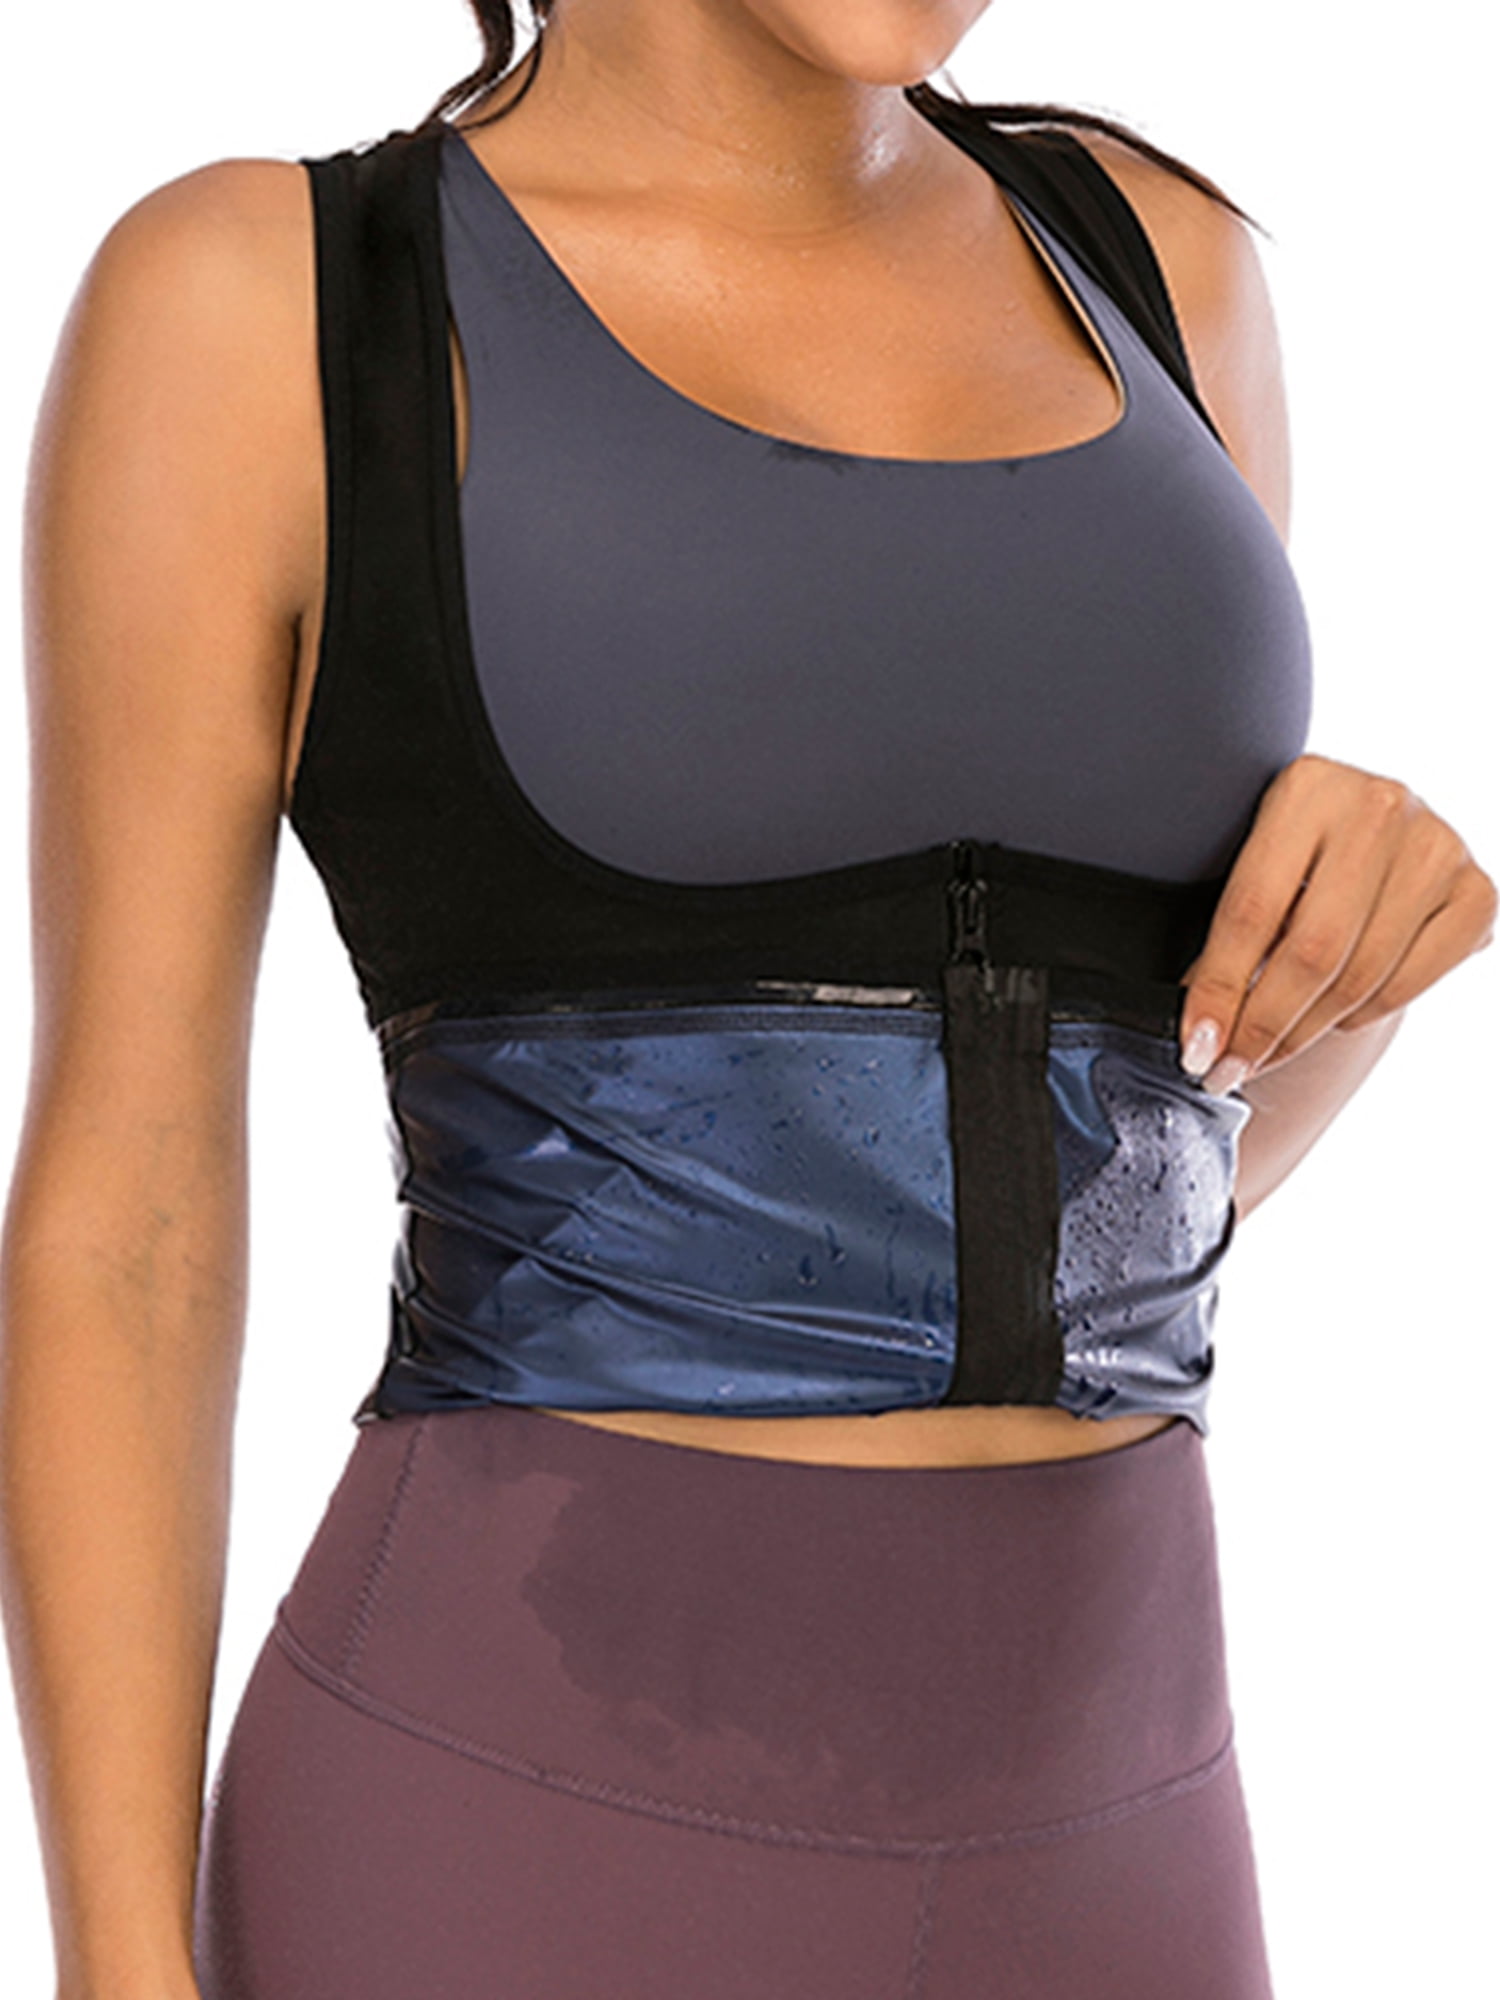 15 Minute Womens workout sweat vest for Weight Loss